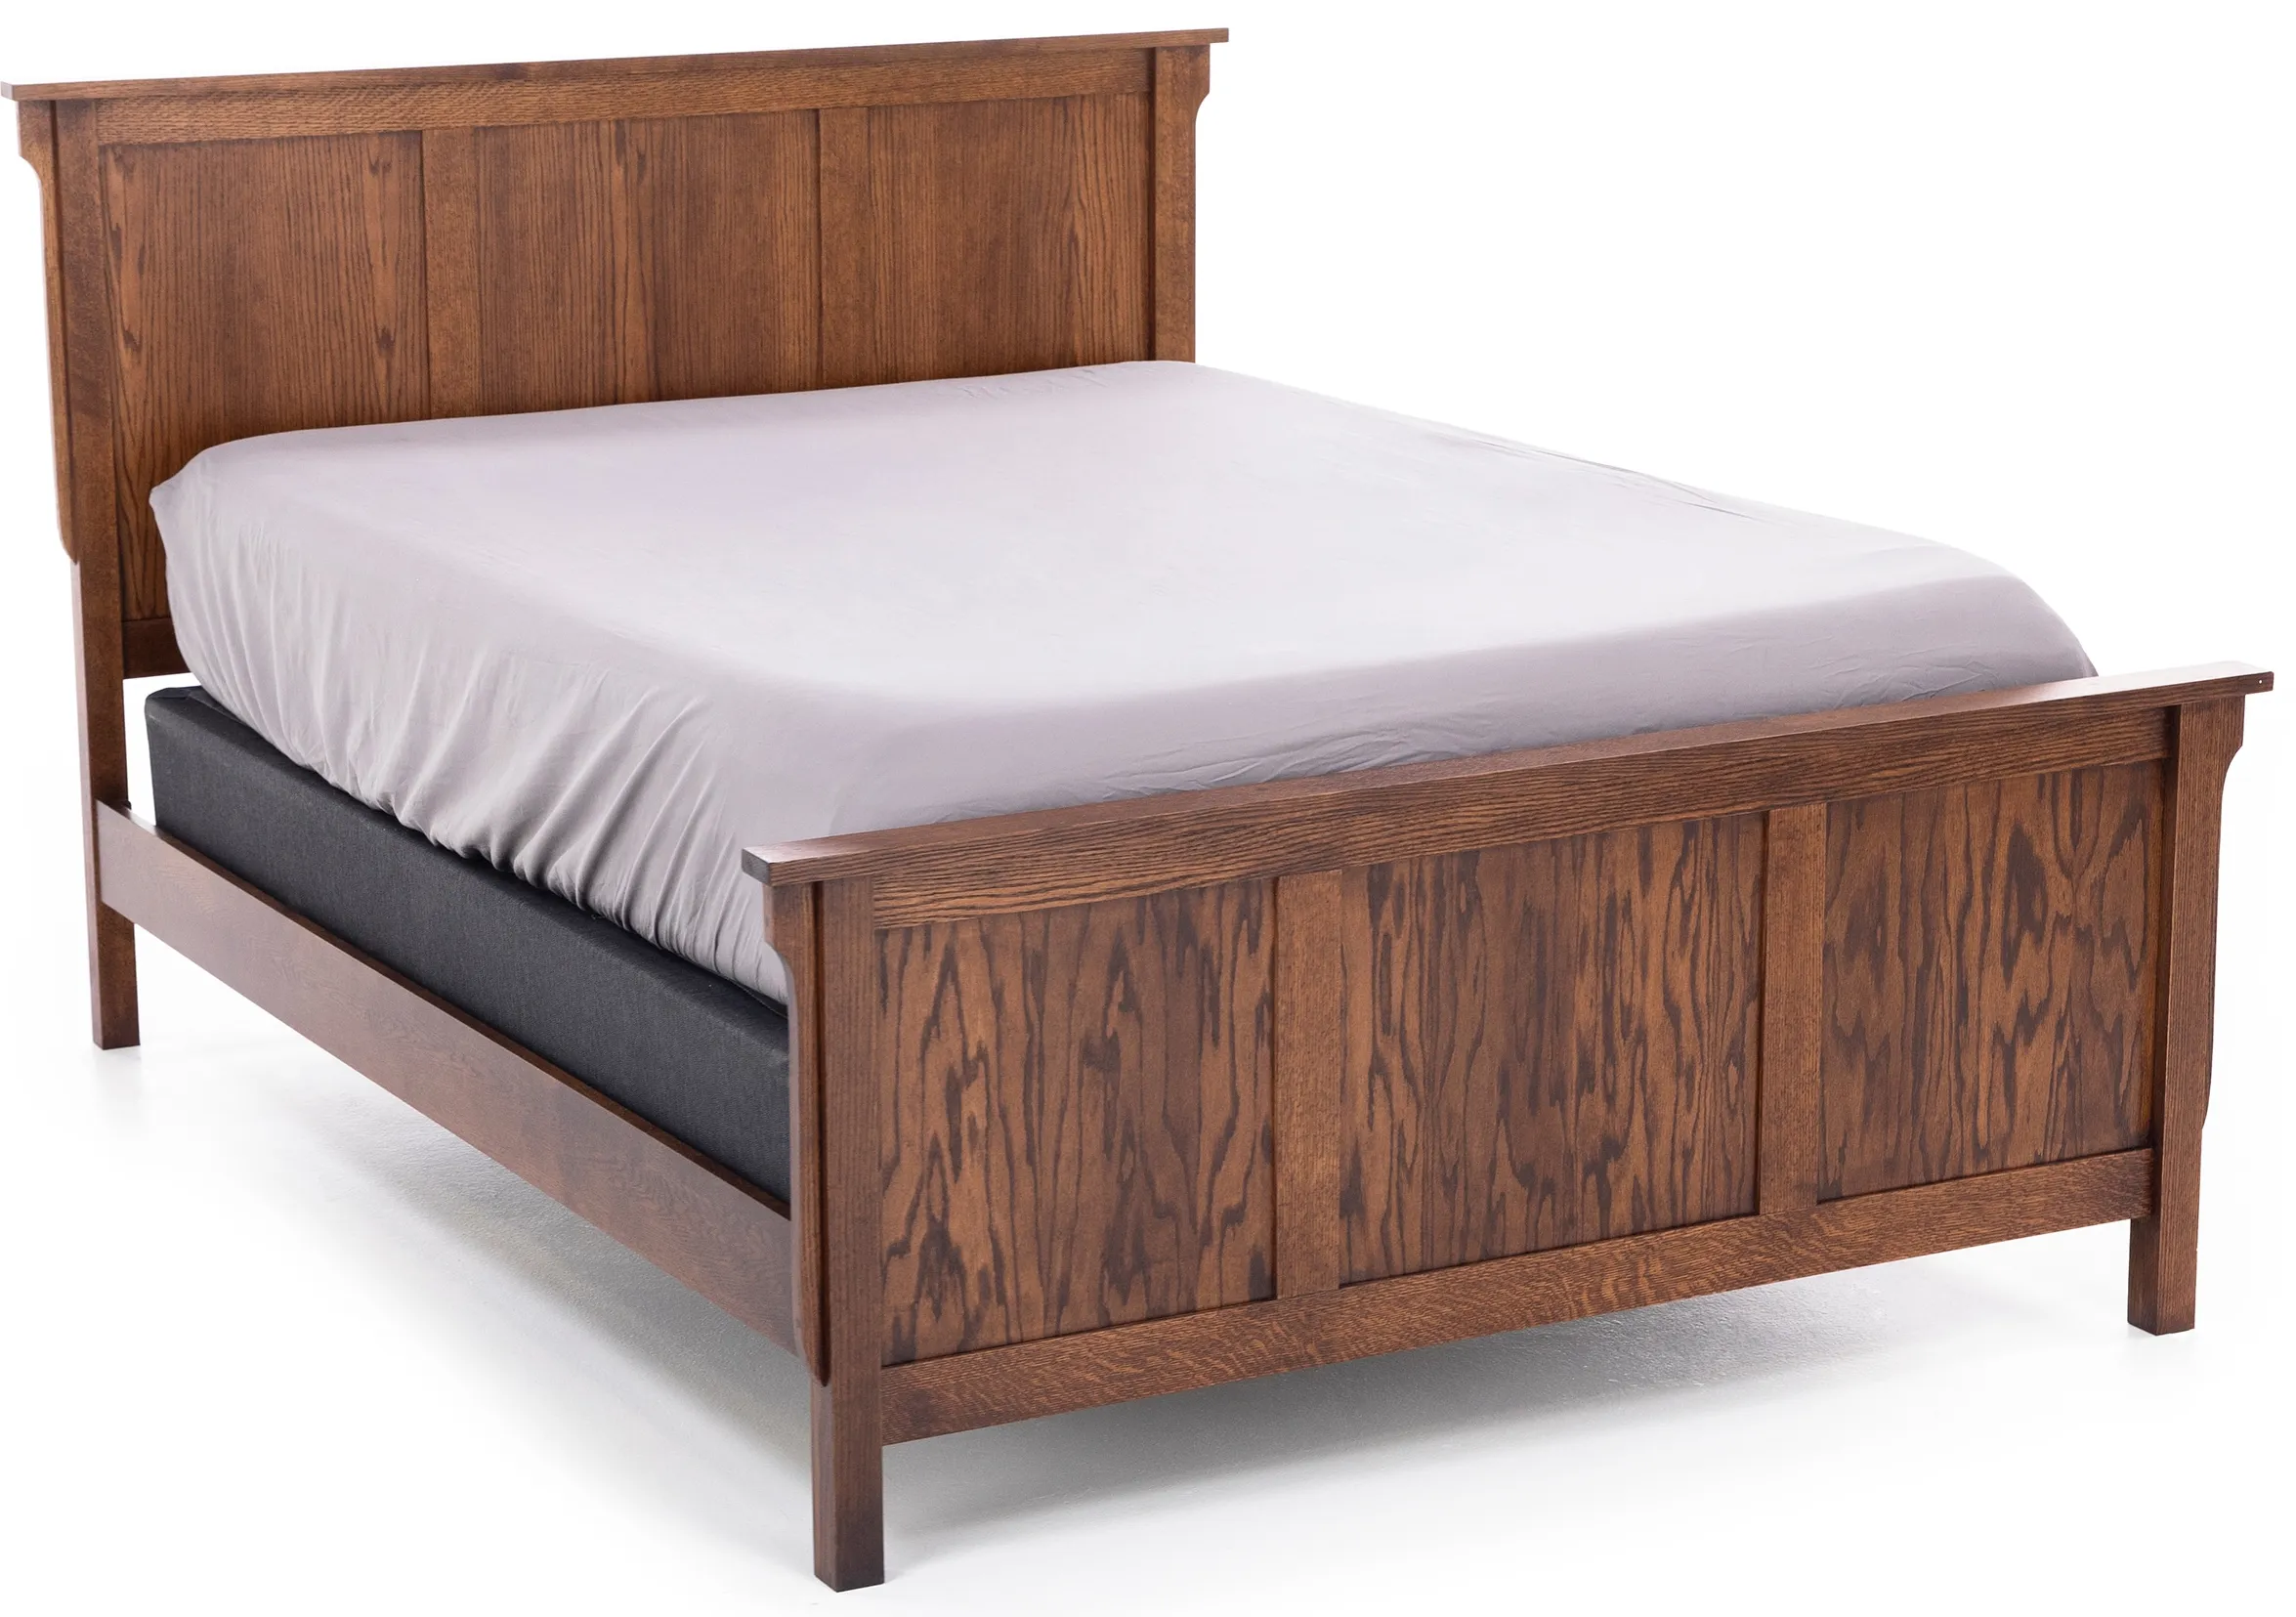 Witmer American Mission #16 King Panel Bed